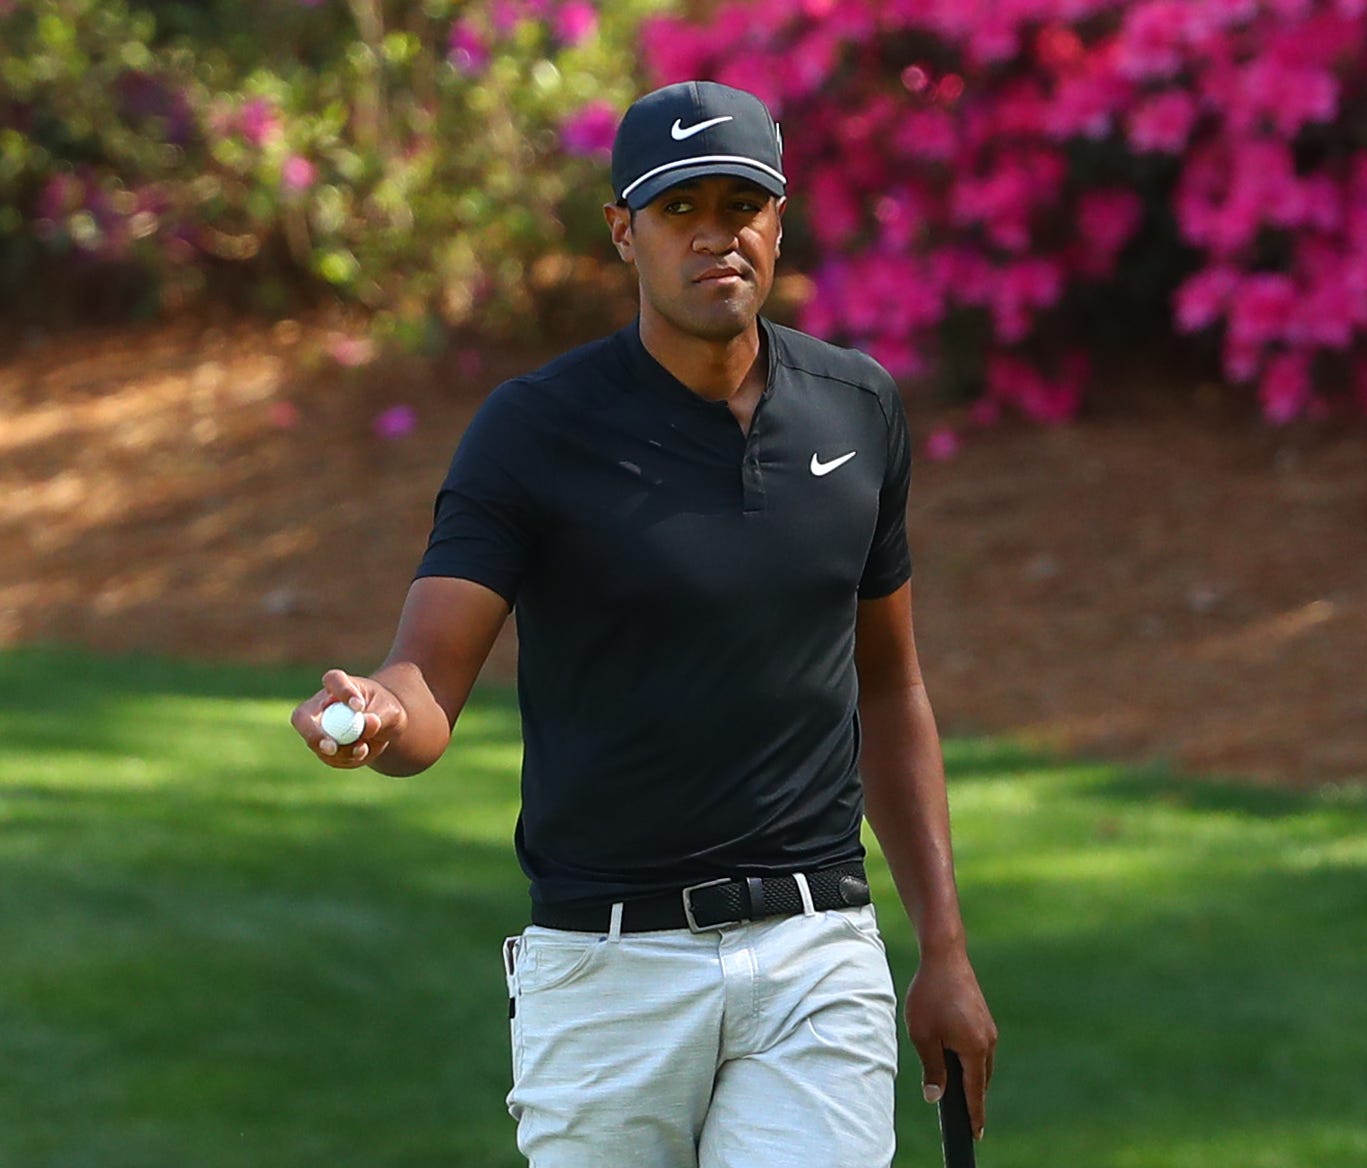 Tony Finau shot a 68 on Thursday in his first appearance at the Masters.